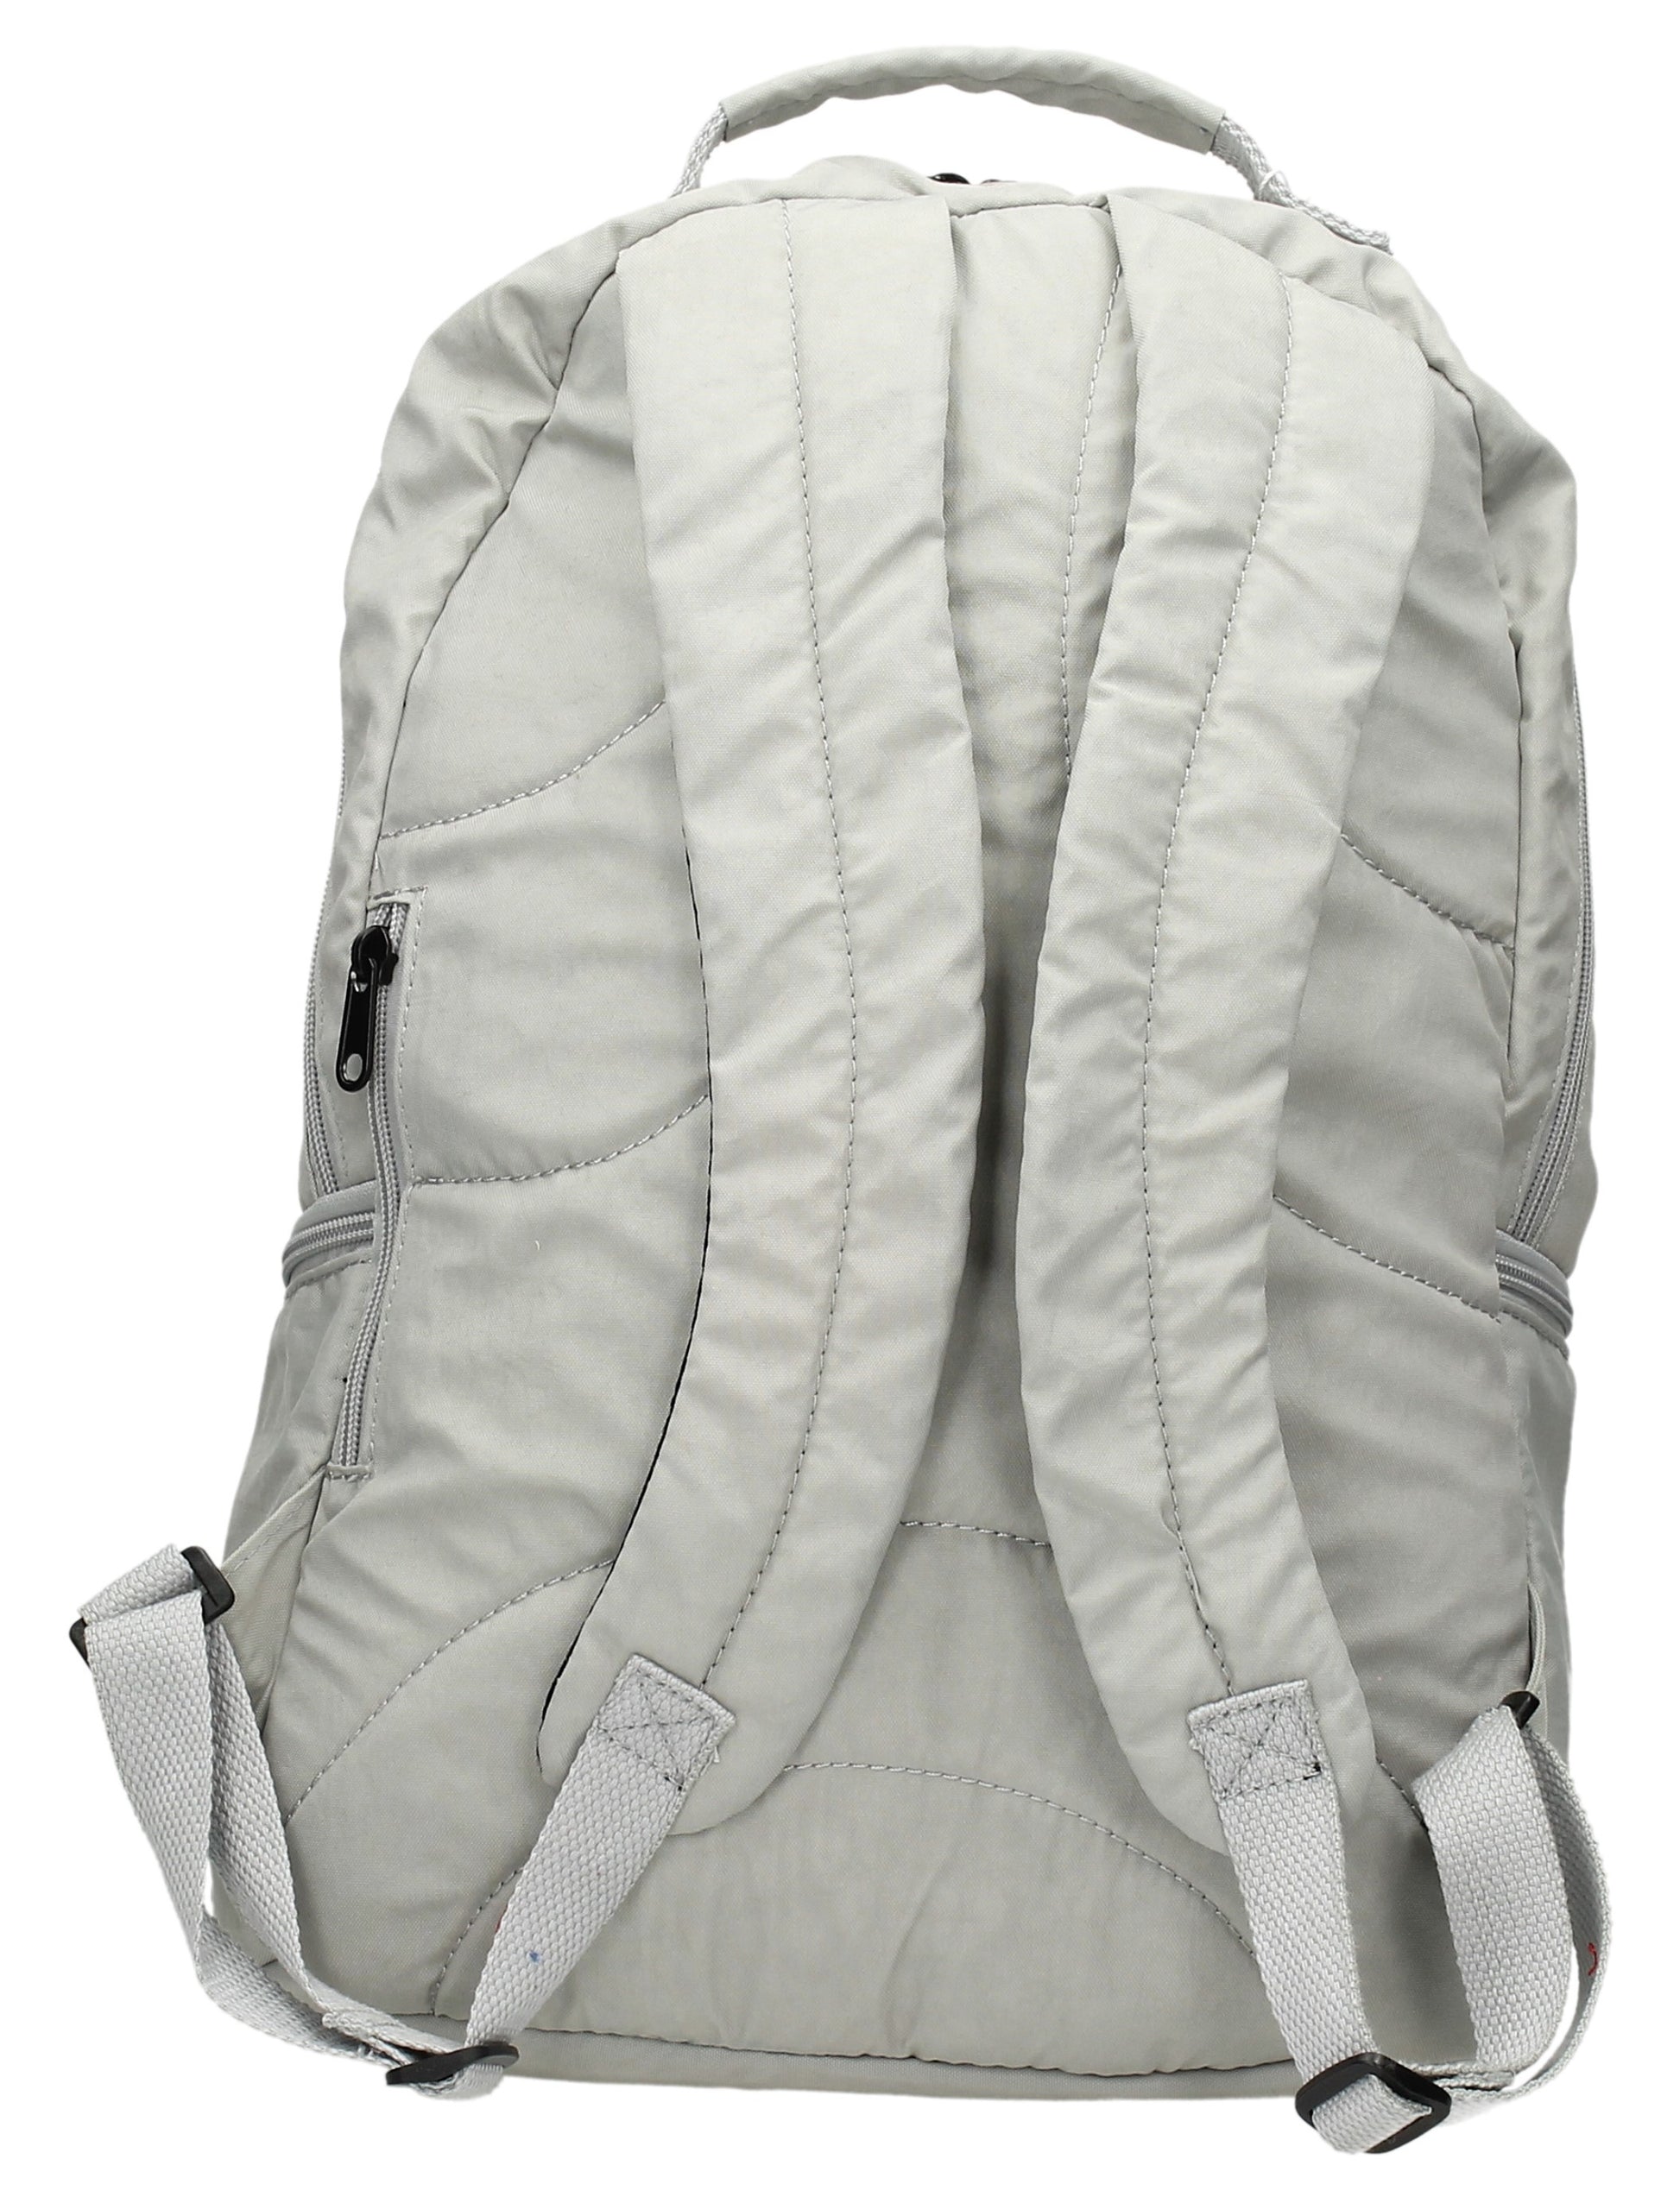 Joseph & Mary Baby Changing Backpack - Pale Grey-Baby Changing-SWANKYSWANS